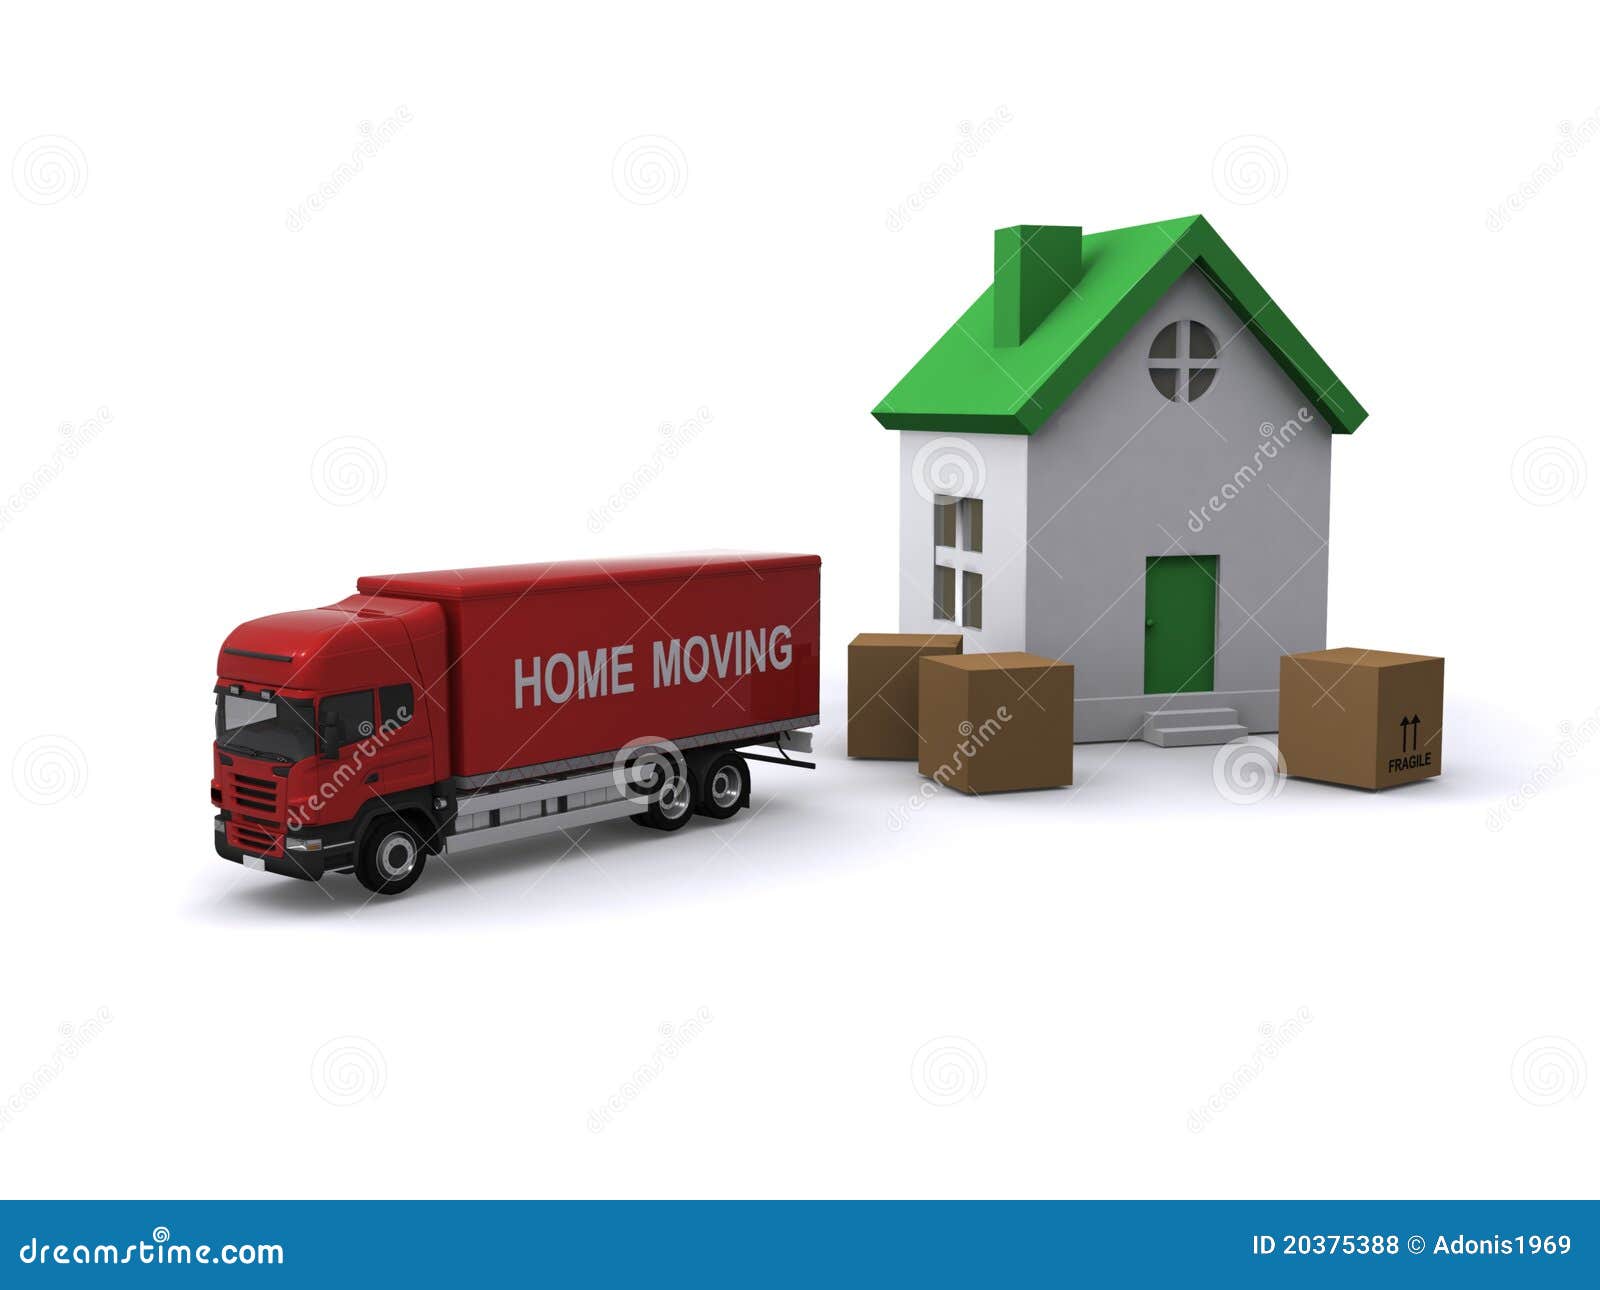 moving home clipart free - photo #40